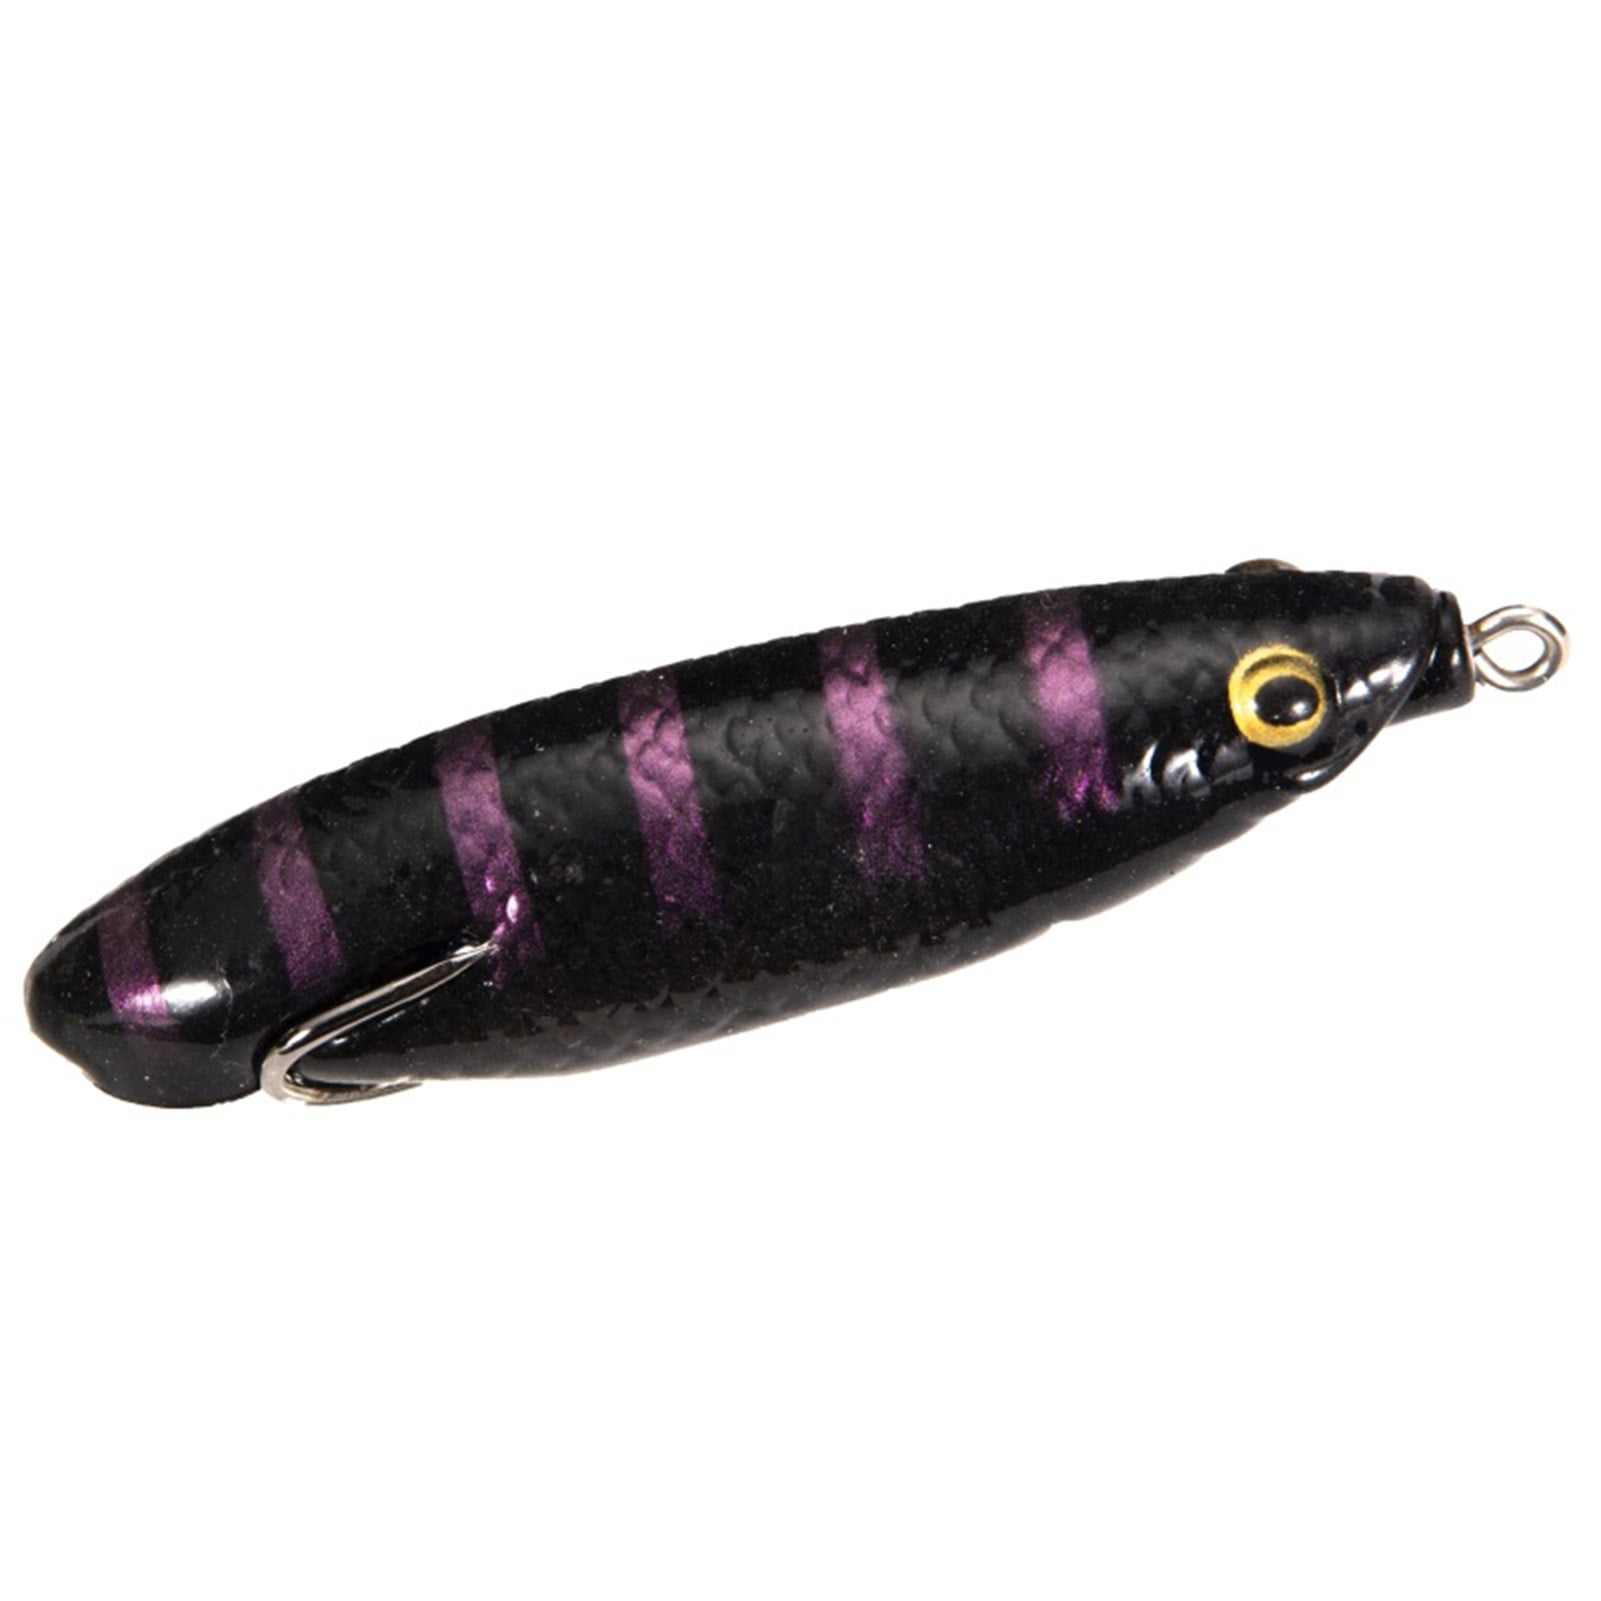 Fishing Lure High Simulation Eyes Lifelike Silicone Minnow Artificial  Fishing Bait for Fishing Lover 